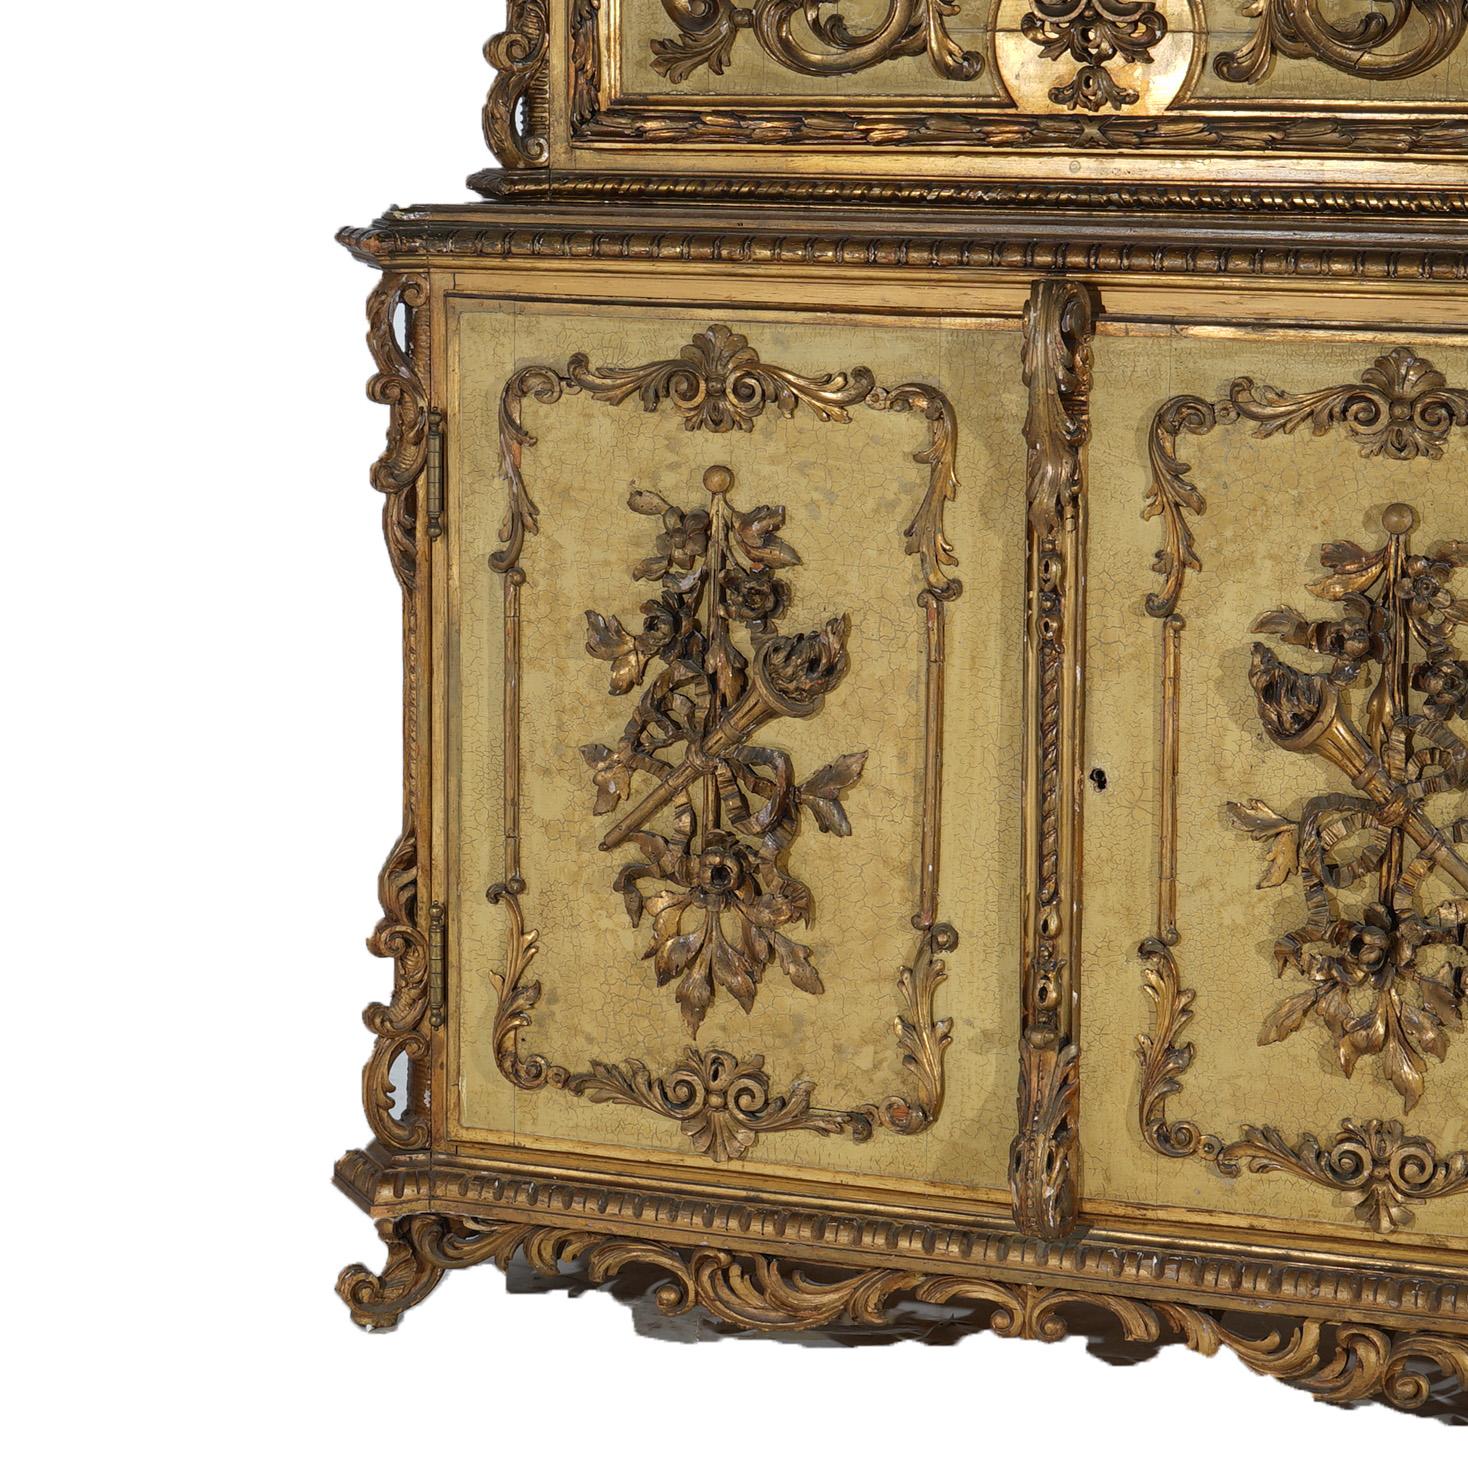 Porcelain Antique French Empire Style Carved Gold Giltwood Credenza & Sevres Plaque 19thC